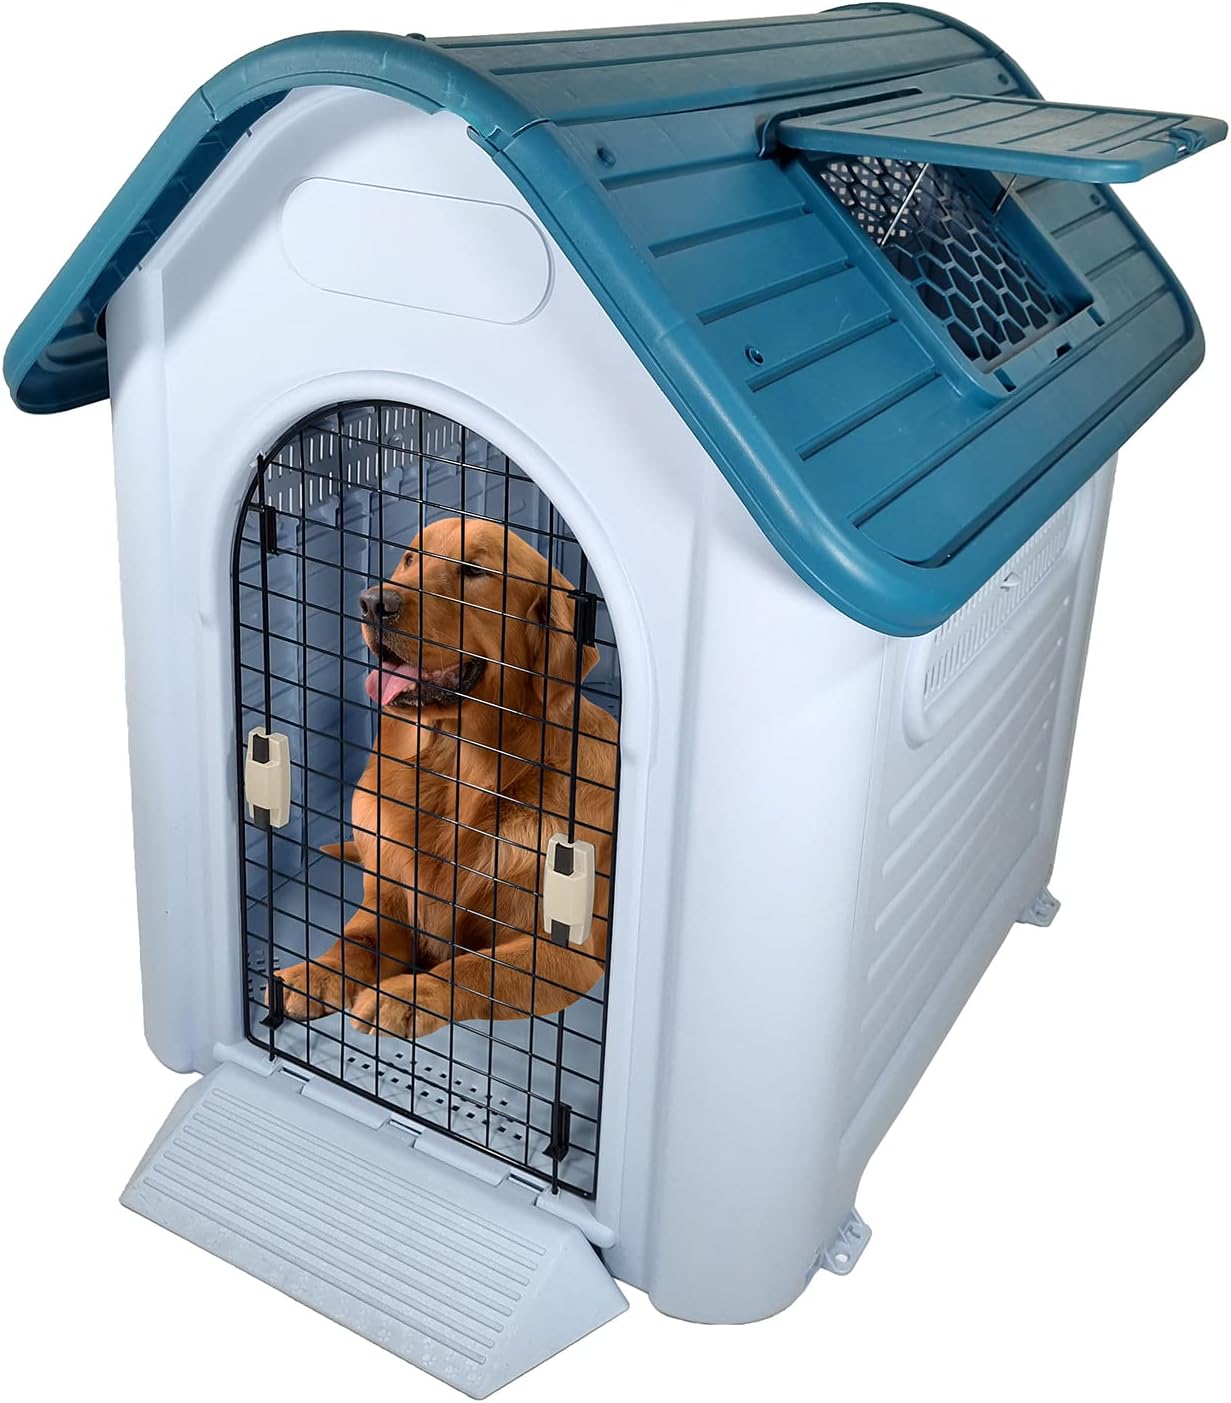 Dog House, Kennel, Indoor / Outdoor Pet House, Thick PP Plastic, Rust &amp; Corrosion Resistant, Portable Dog Shelter, Strong Design, Sturdy, Easy to Clean, Grey + Blue-Green mix color cage, 113 cm height